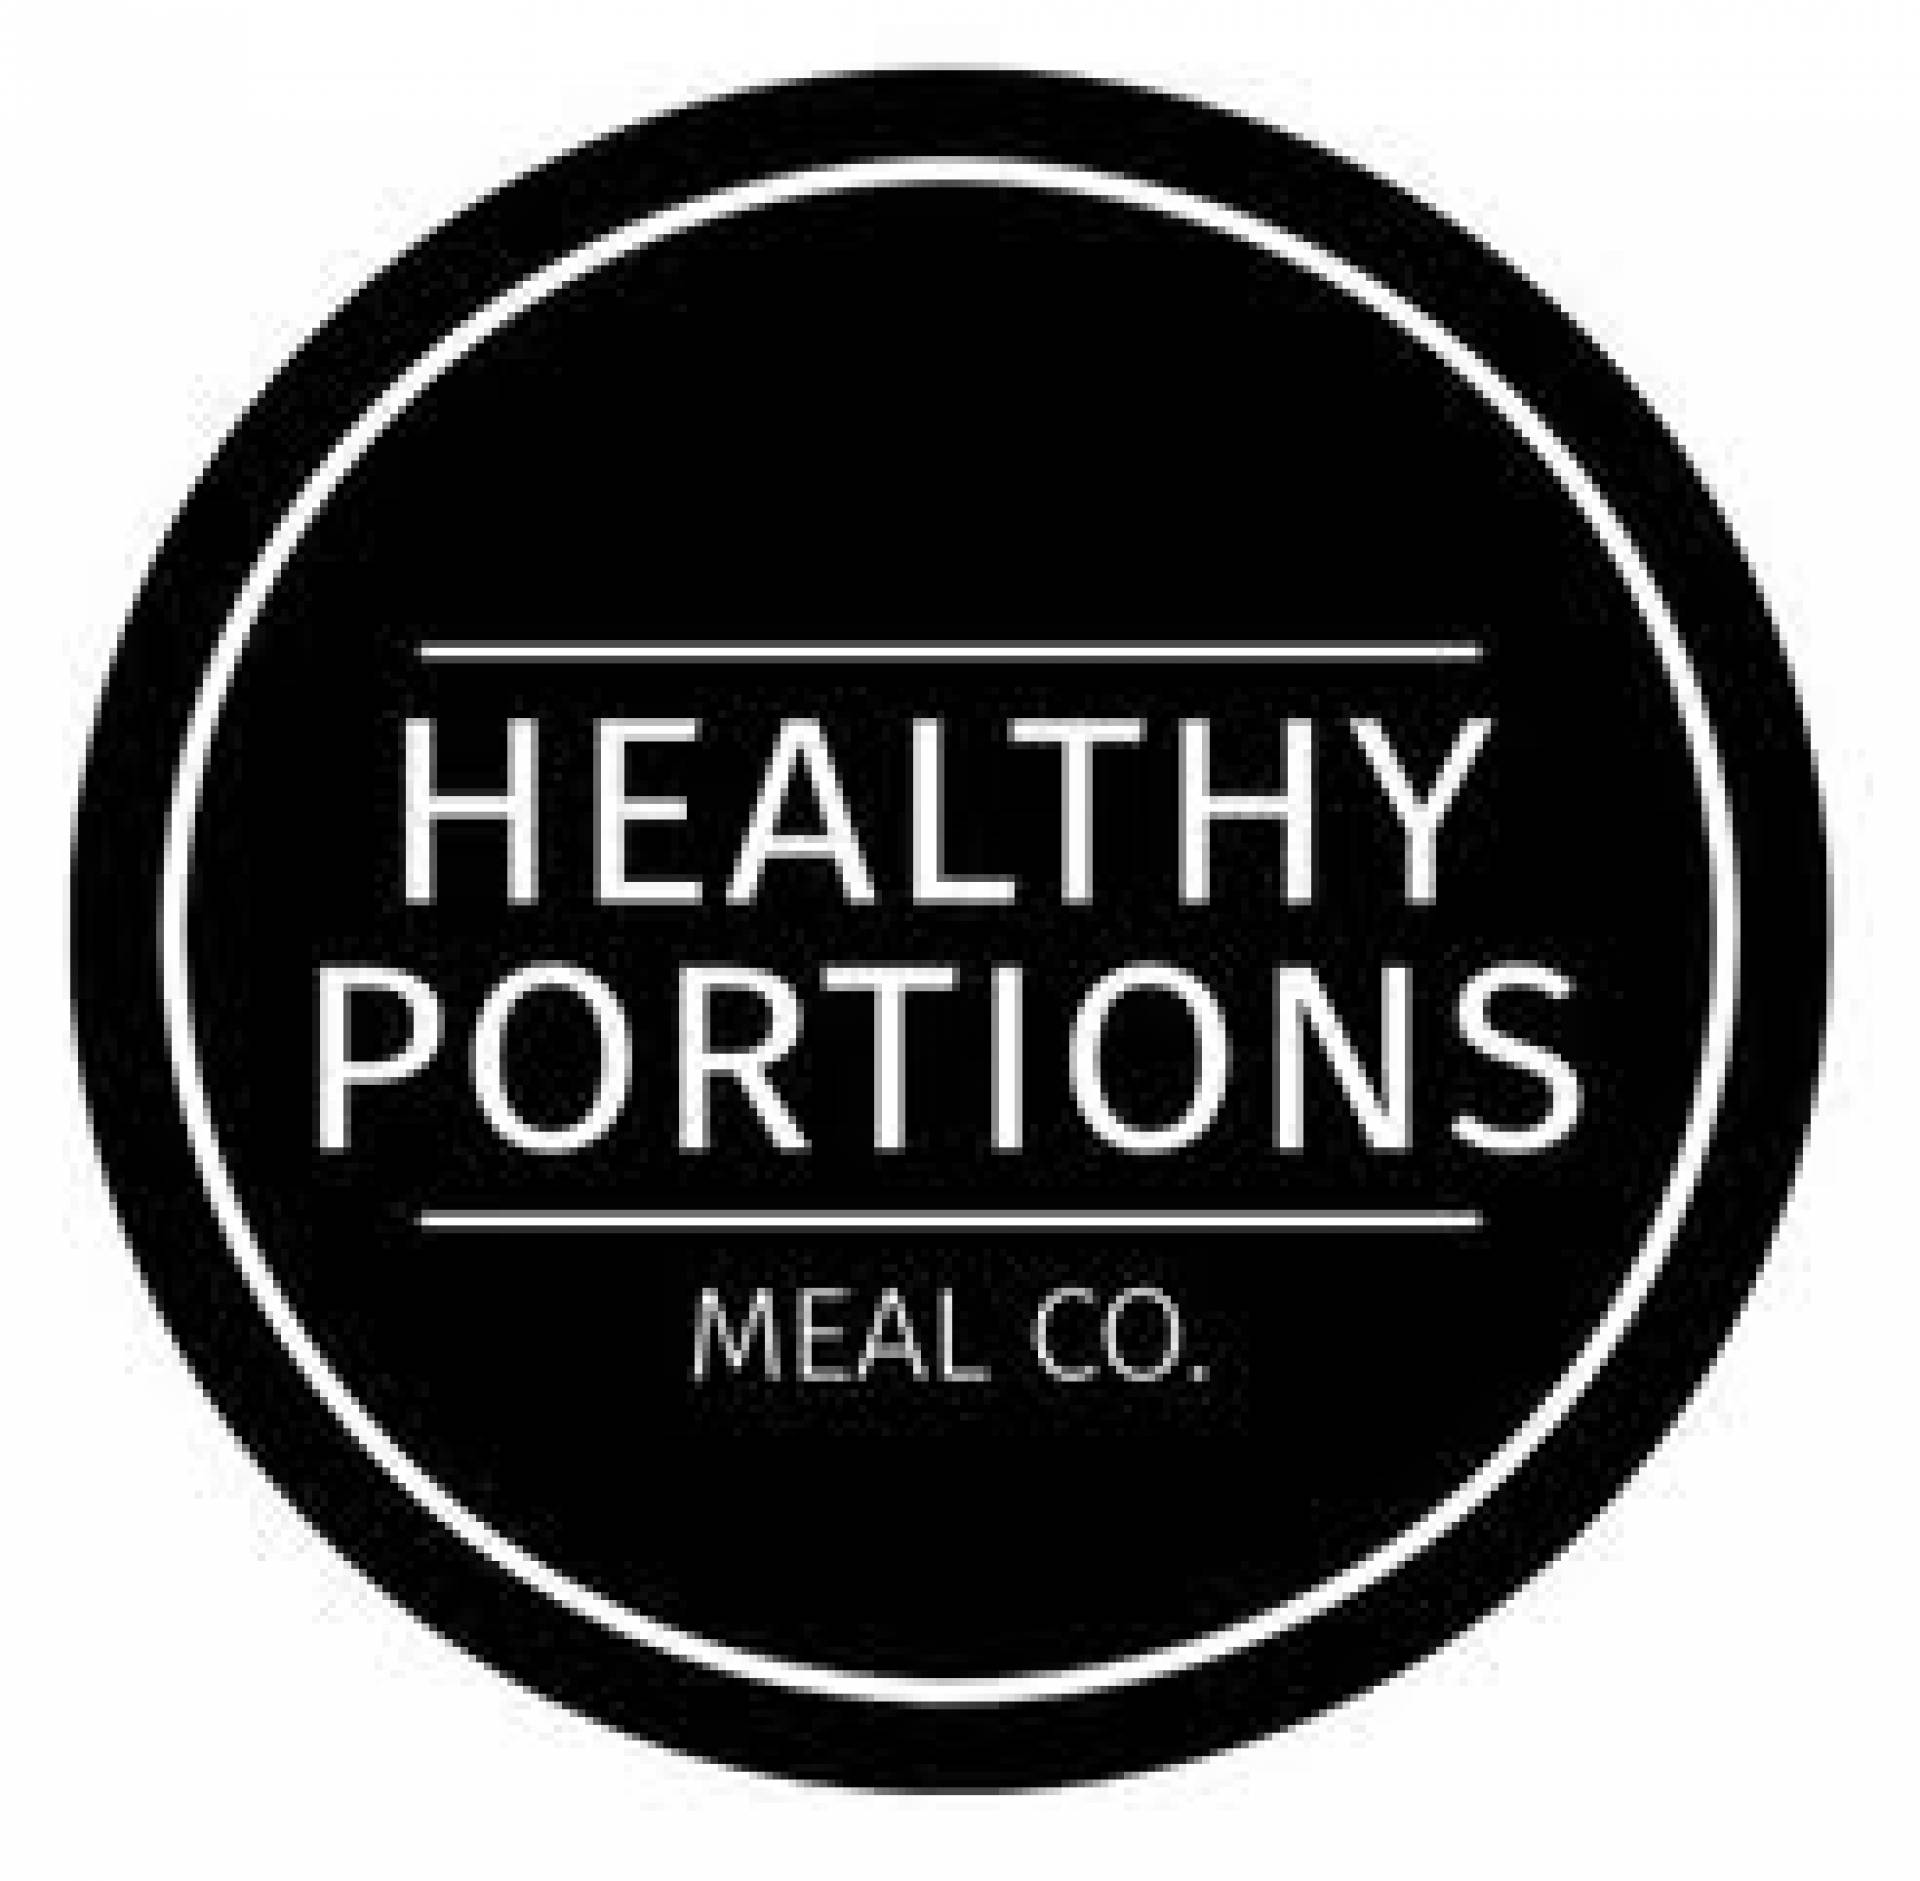 Healthy Portions Meal Co.